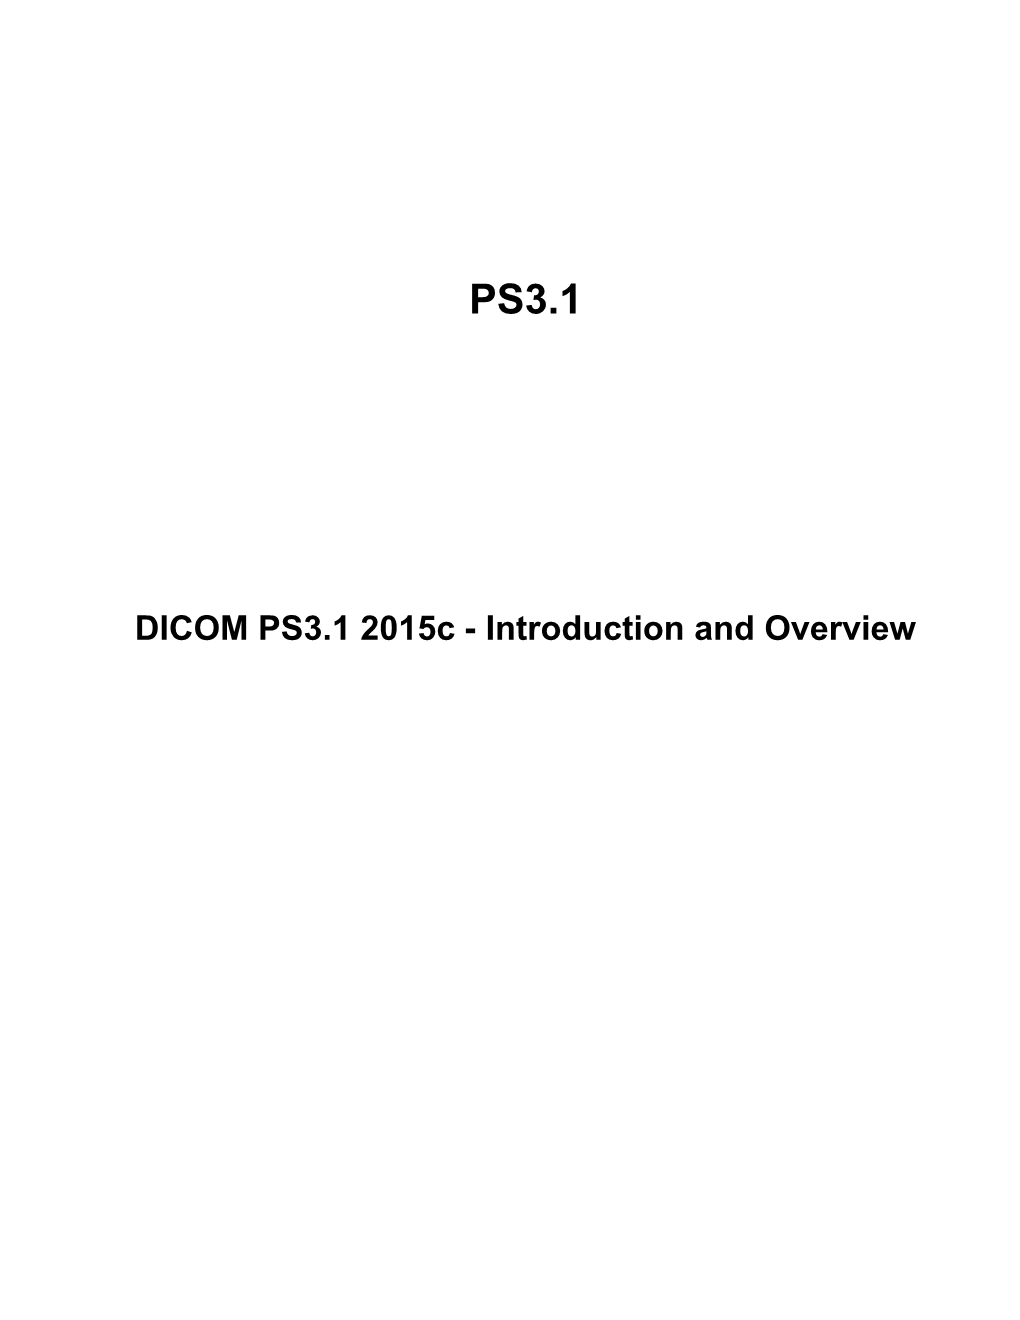 DICOM PS3.1 2015C - Introduction and Overview